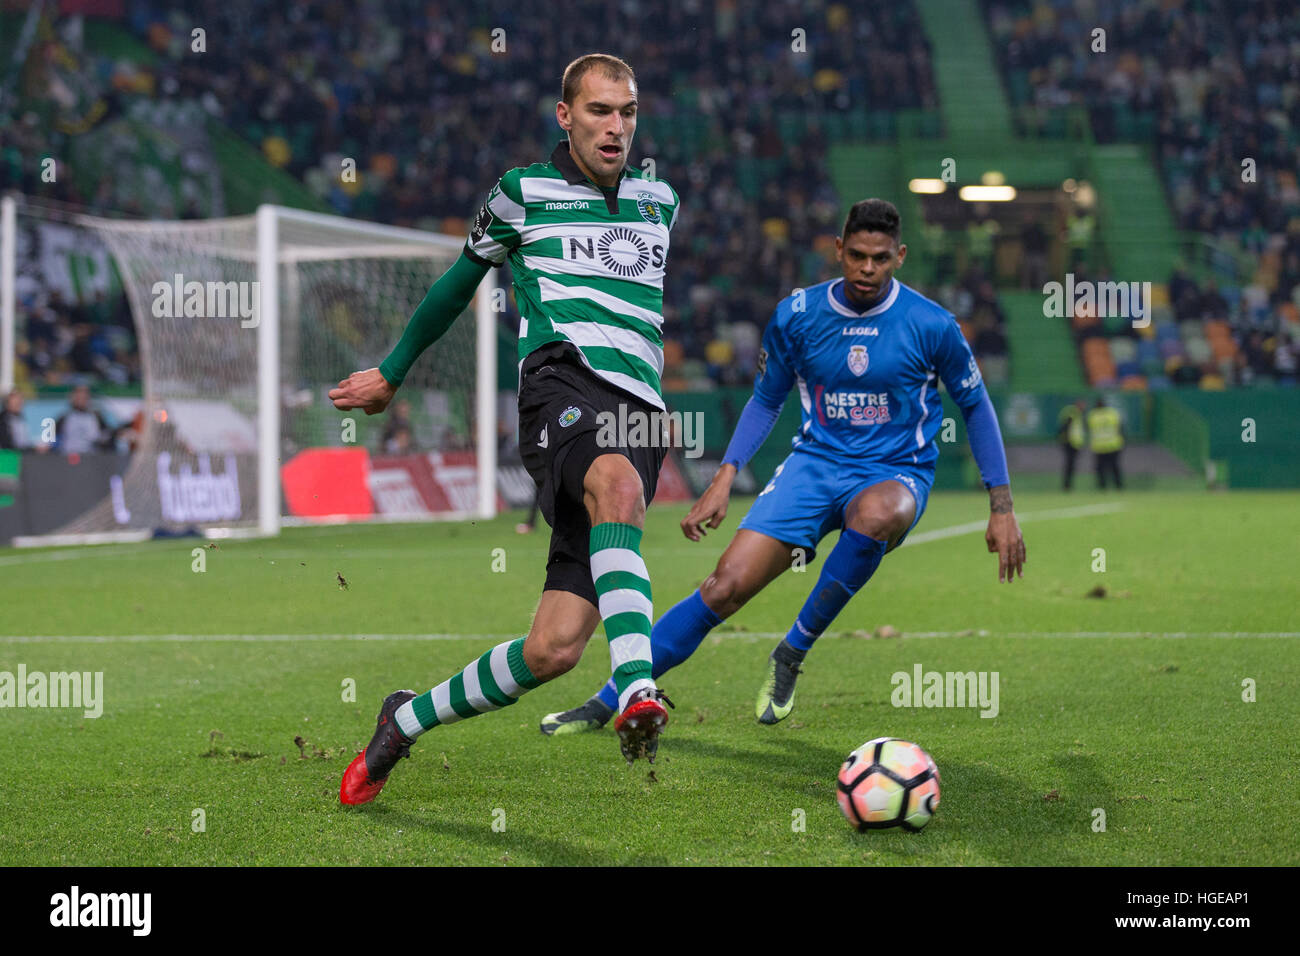 Lisbon, Portugal. 08th Jan, 2017. Sporting's forward from Holland Bas Dost  (28) in action during the game Sporting CP vs CD Feirense © Alexandre de  Sousa/Alamy Live News Stock Photo - Alamy